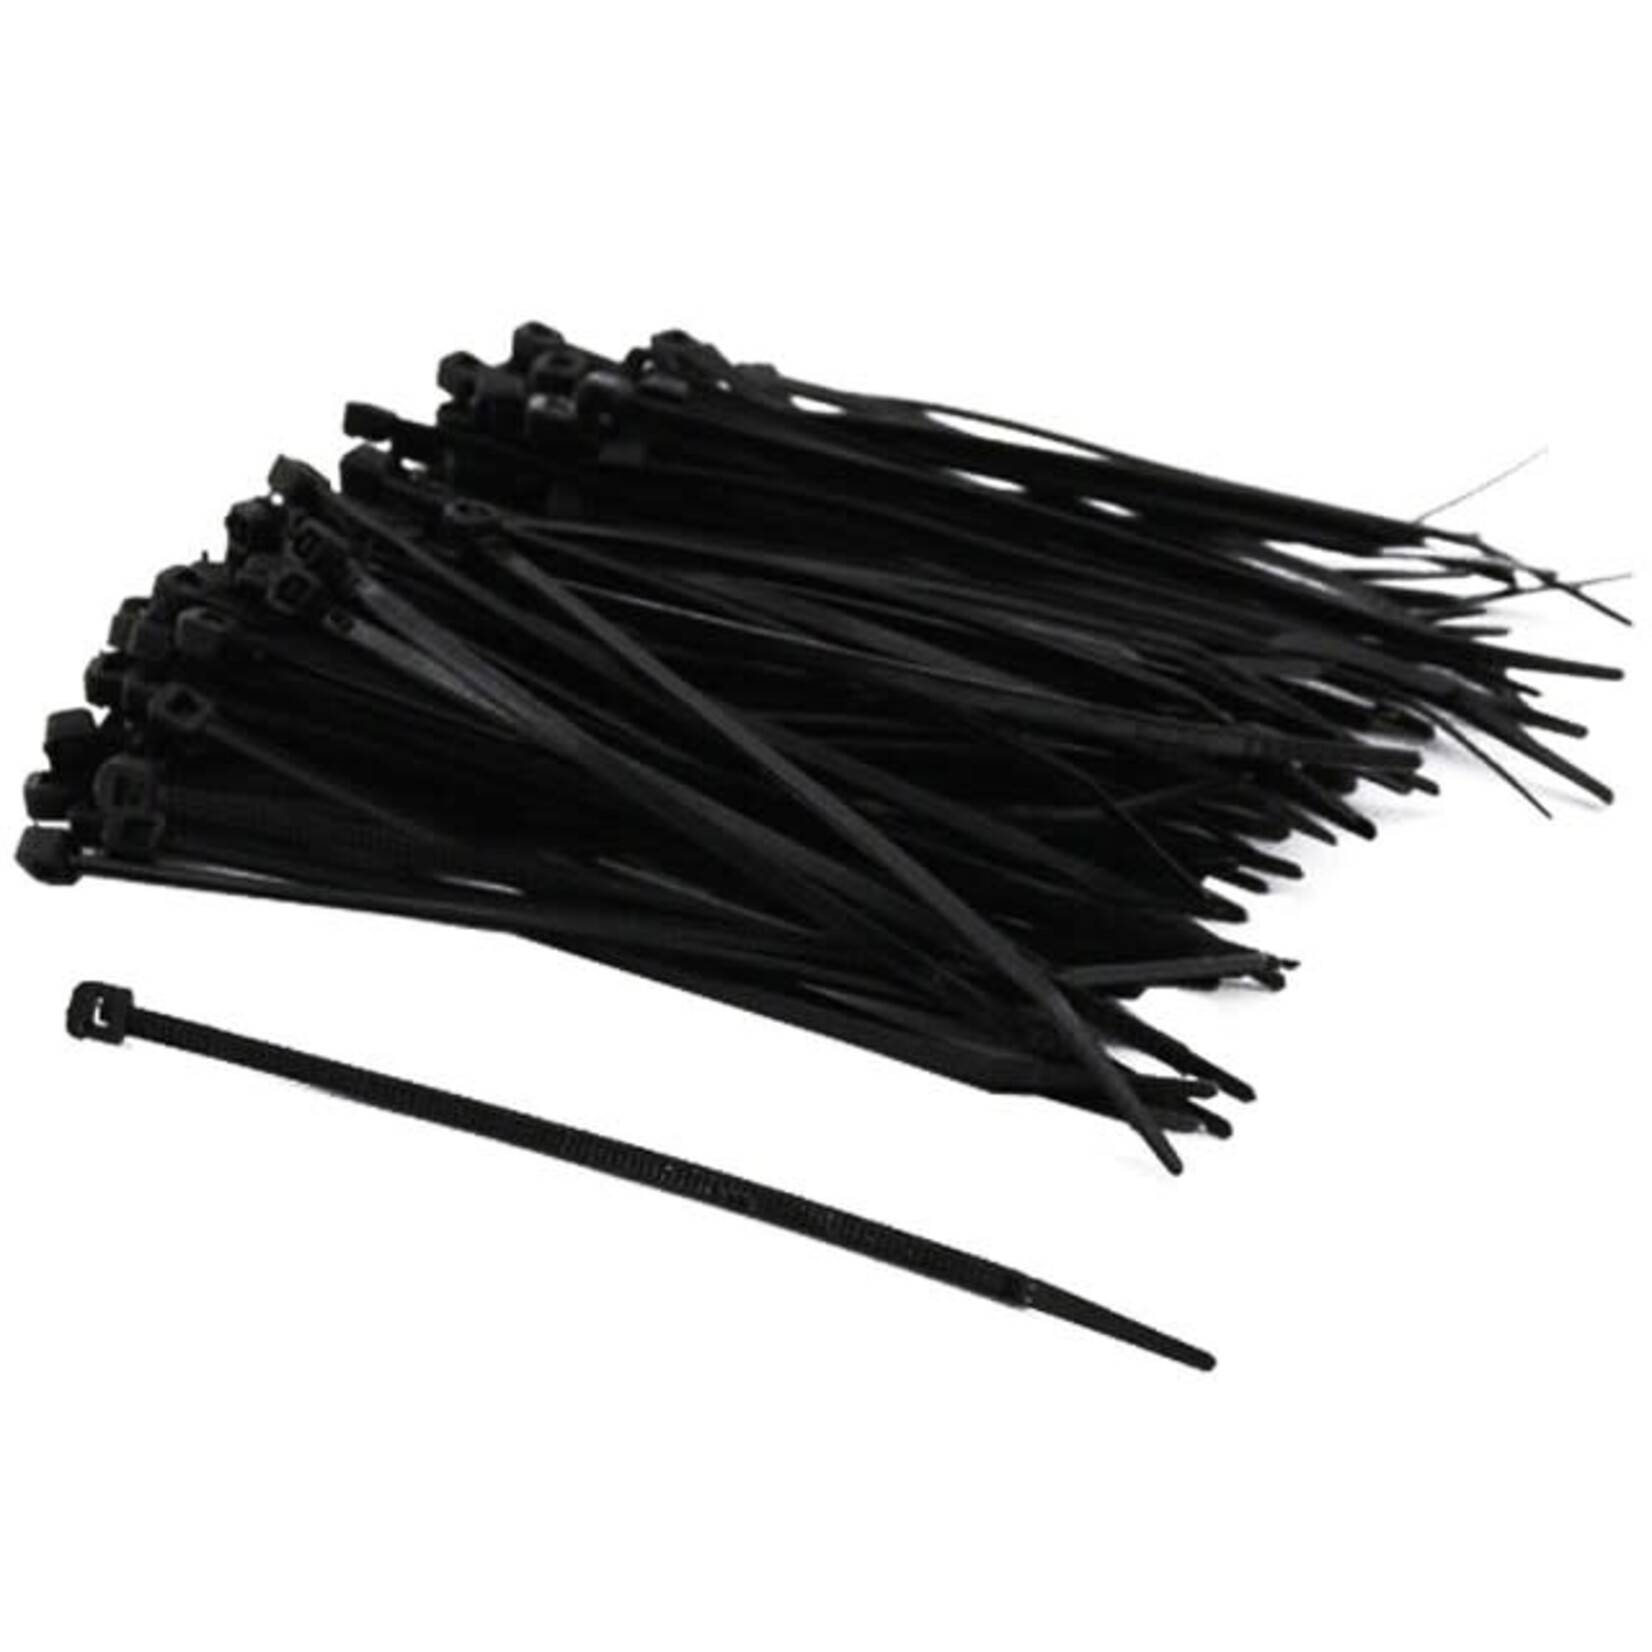 Cable Ties Pack (100pcs) Black 6" x 50 lbs